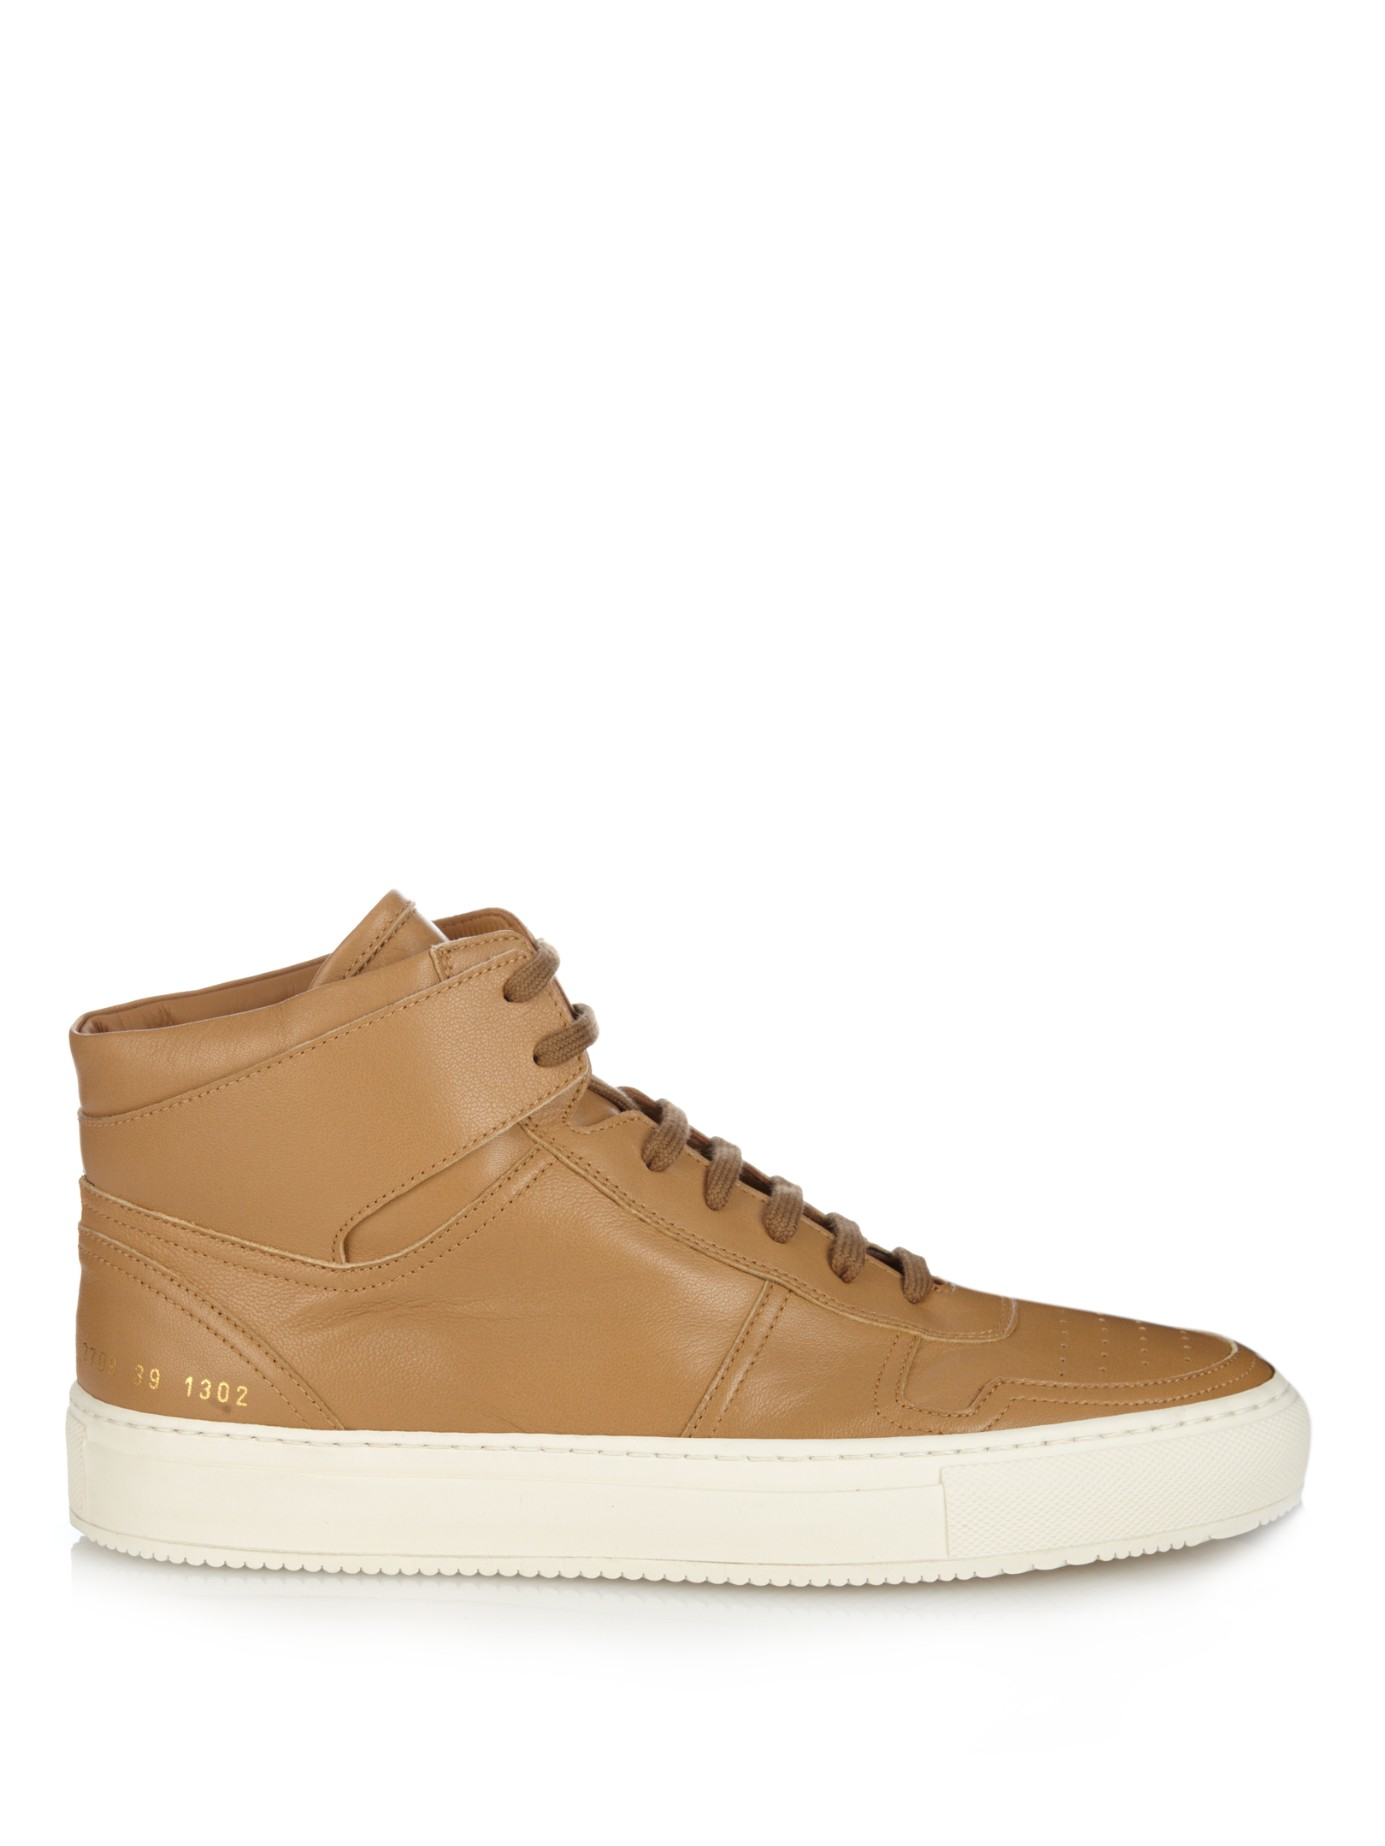 Lyst - Common projects B Ball Leather High-Top Sneakers in Brown